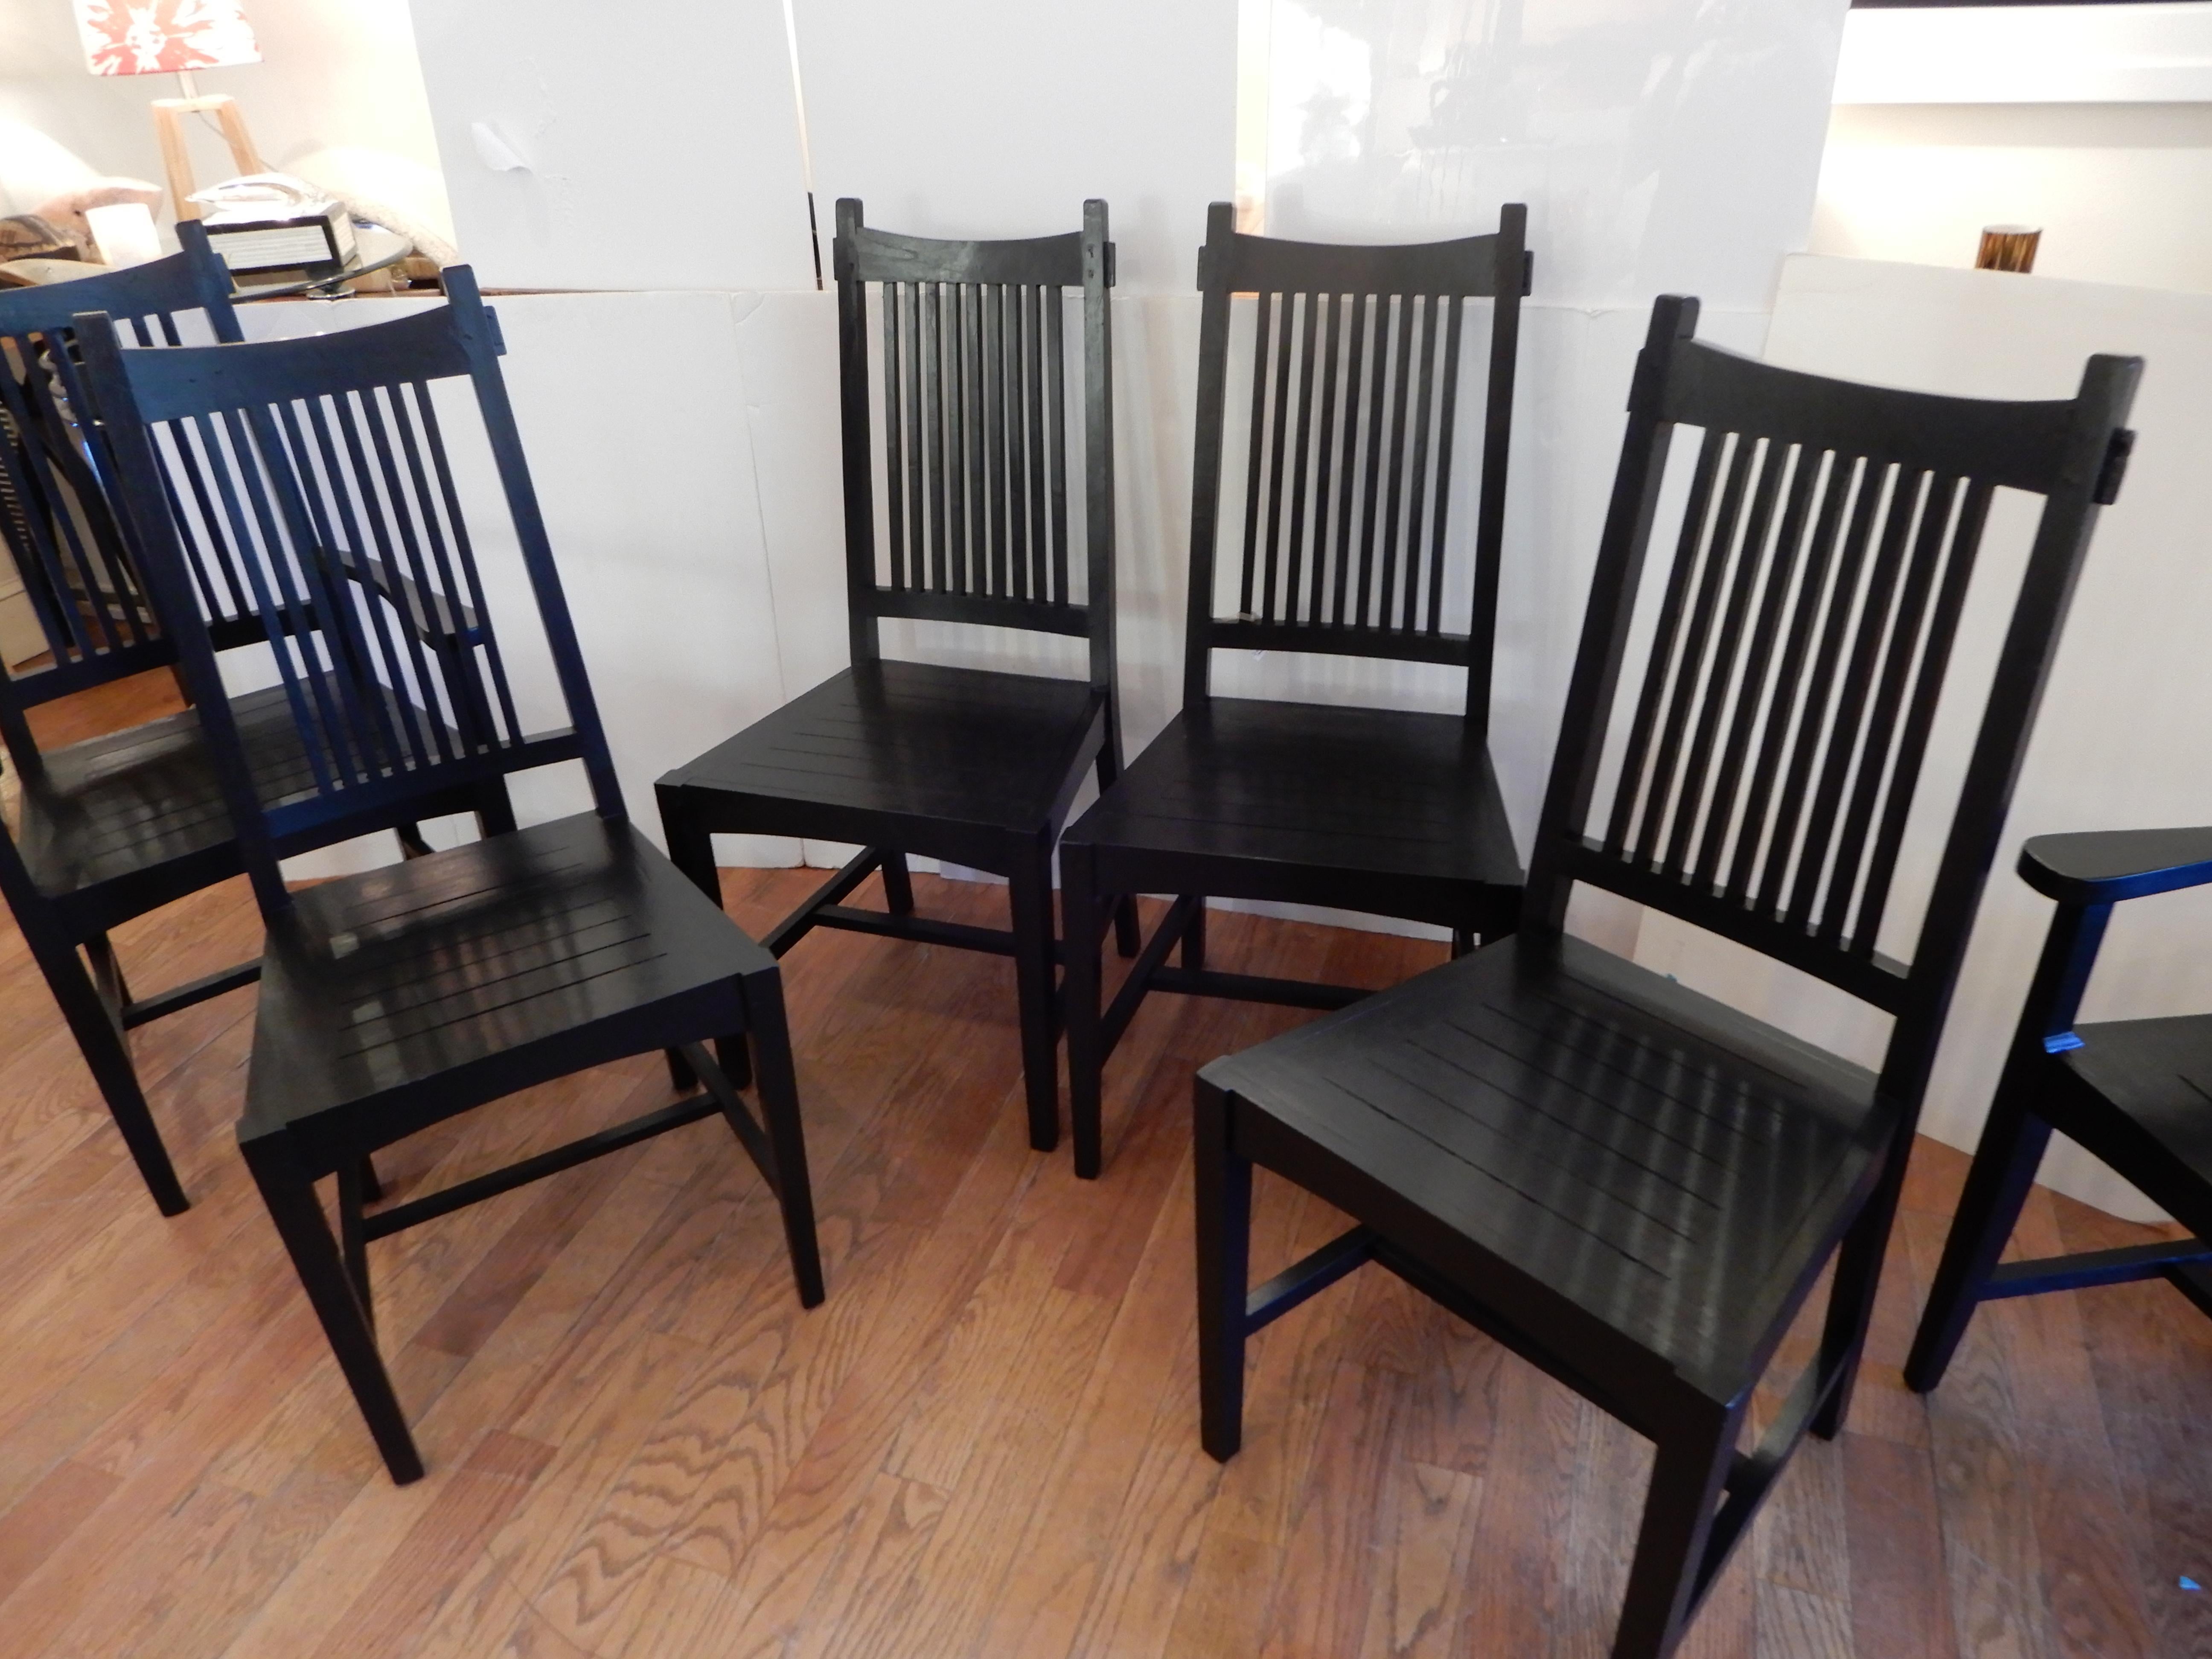 There are two arm chairs and 4 side chairs all in immaculate condition, constructed by hand of (Java Hardwoods) by studio Craft artist David Smith.
David known for his impeccable hand crafted American Country Furniture has several books in his name.